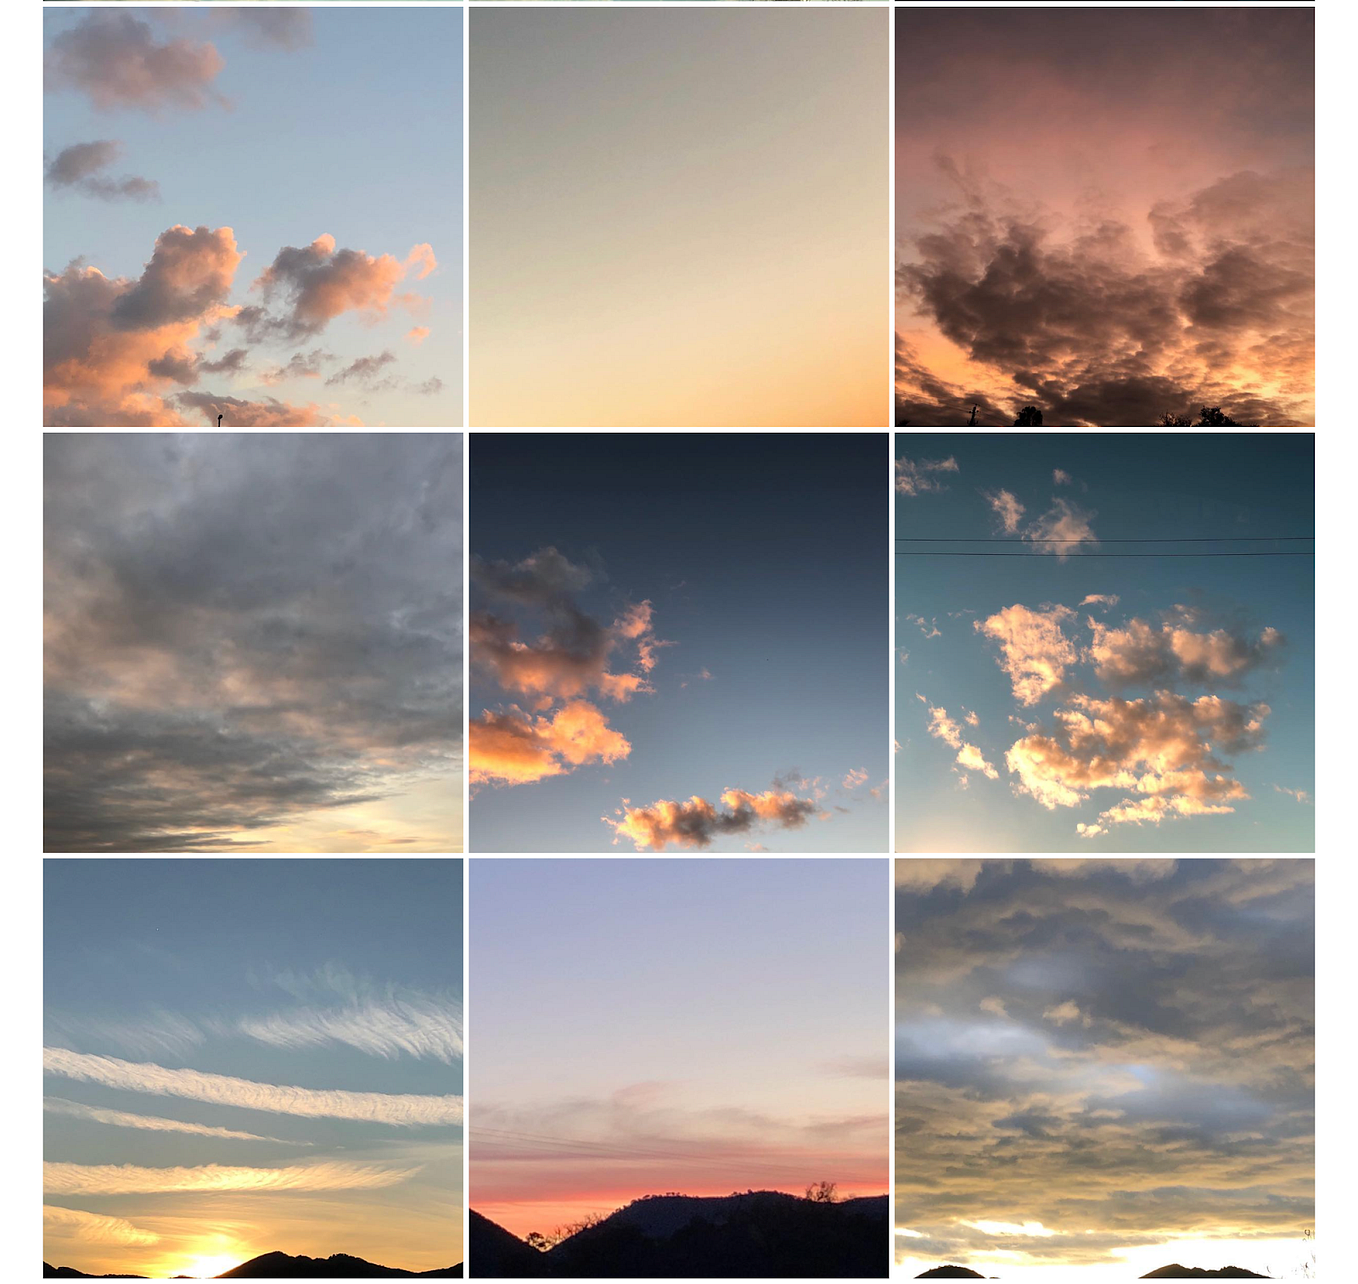 A 3 by 3 grid of photos of clouds and sky from the Instagram account of Adam Old.